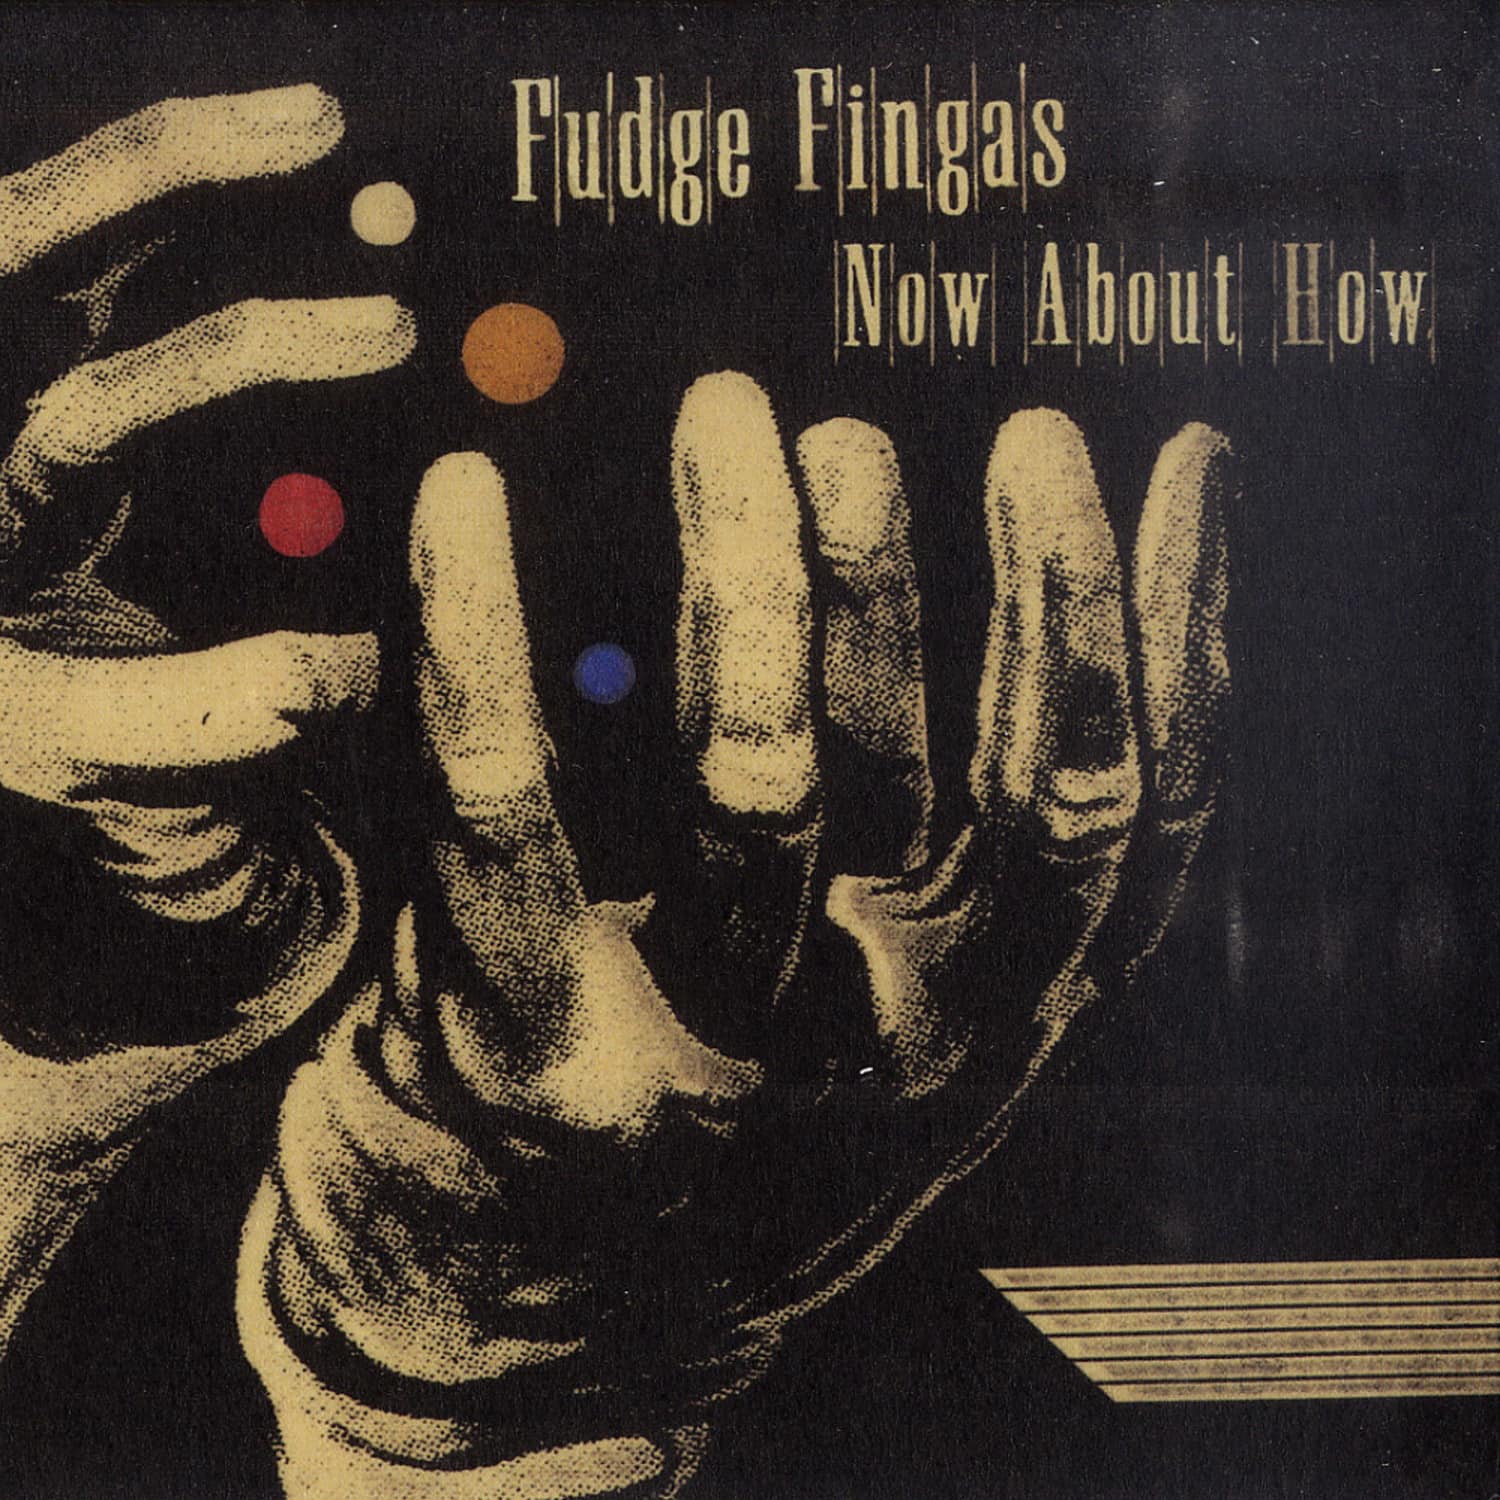 Fudge Fingas - NOW ABOUT HOW 